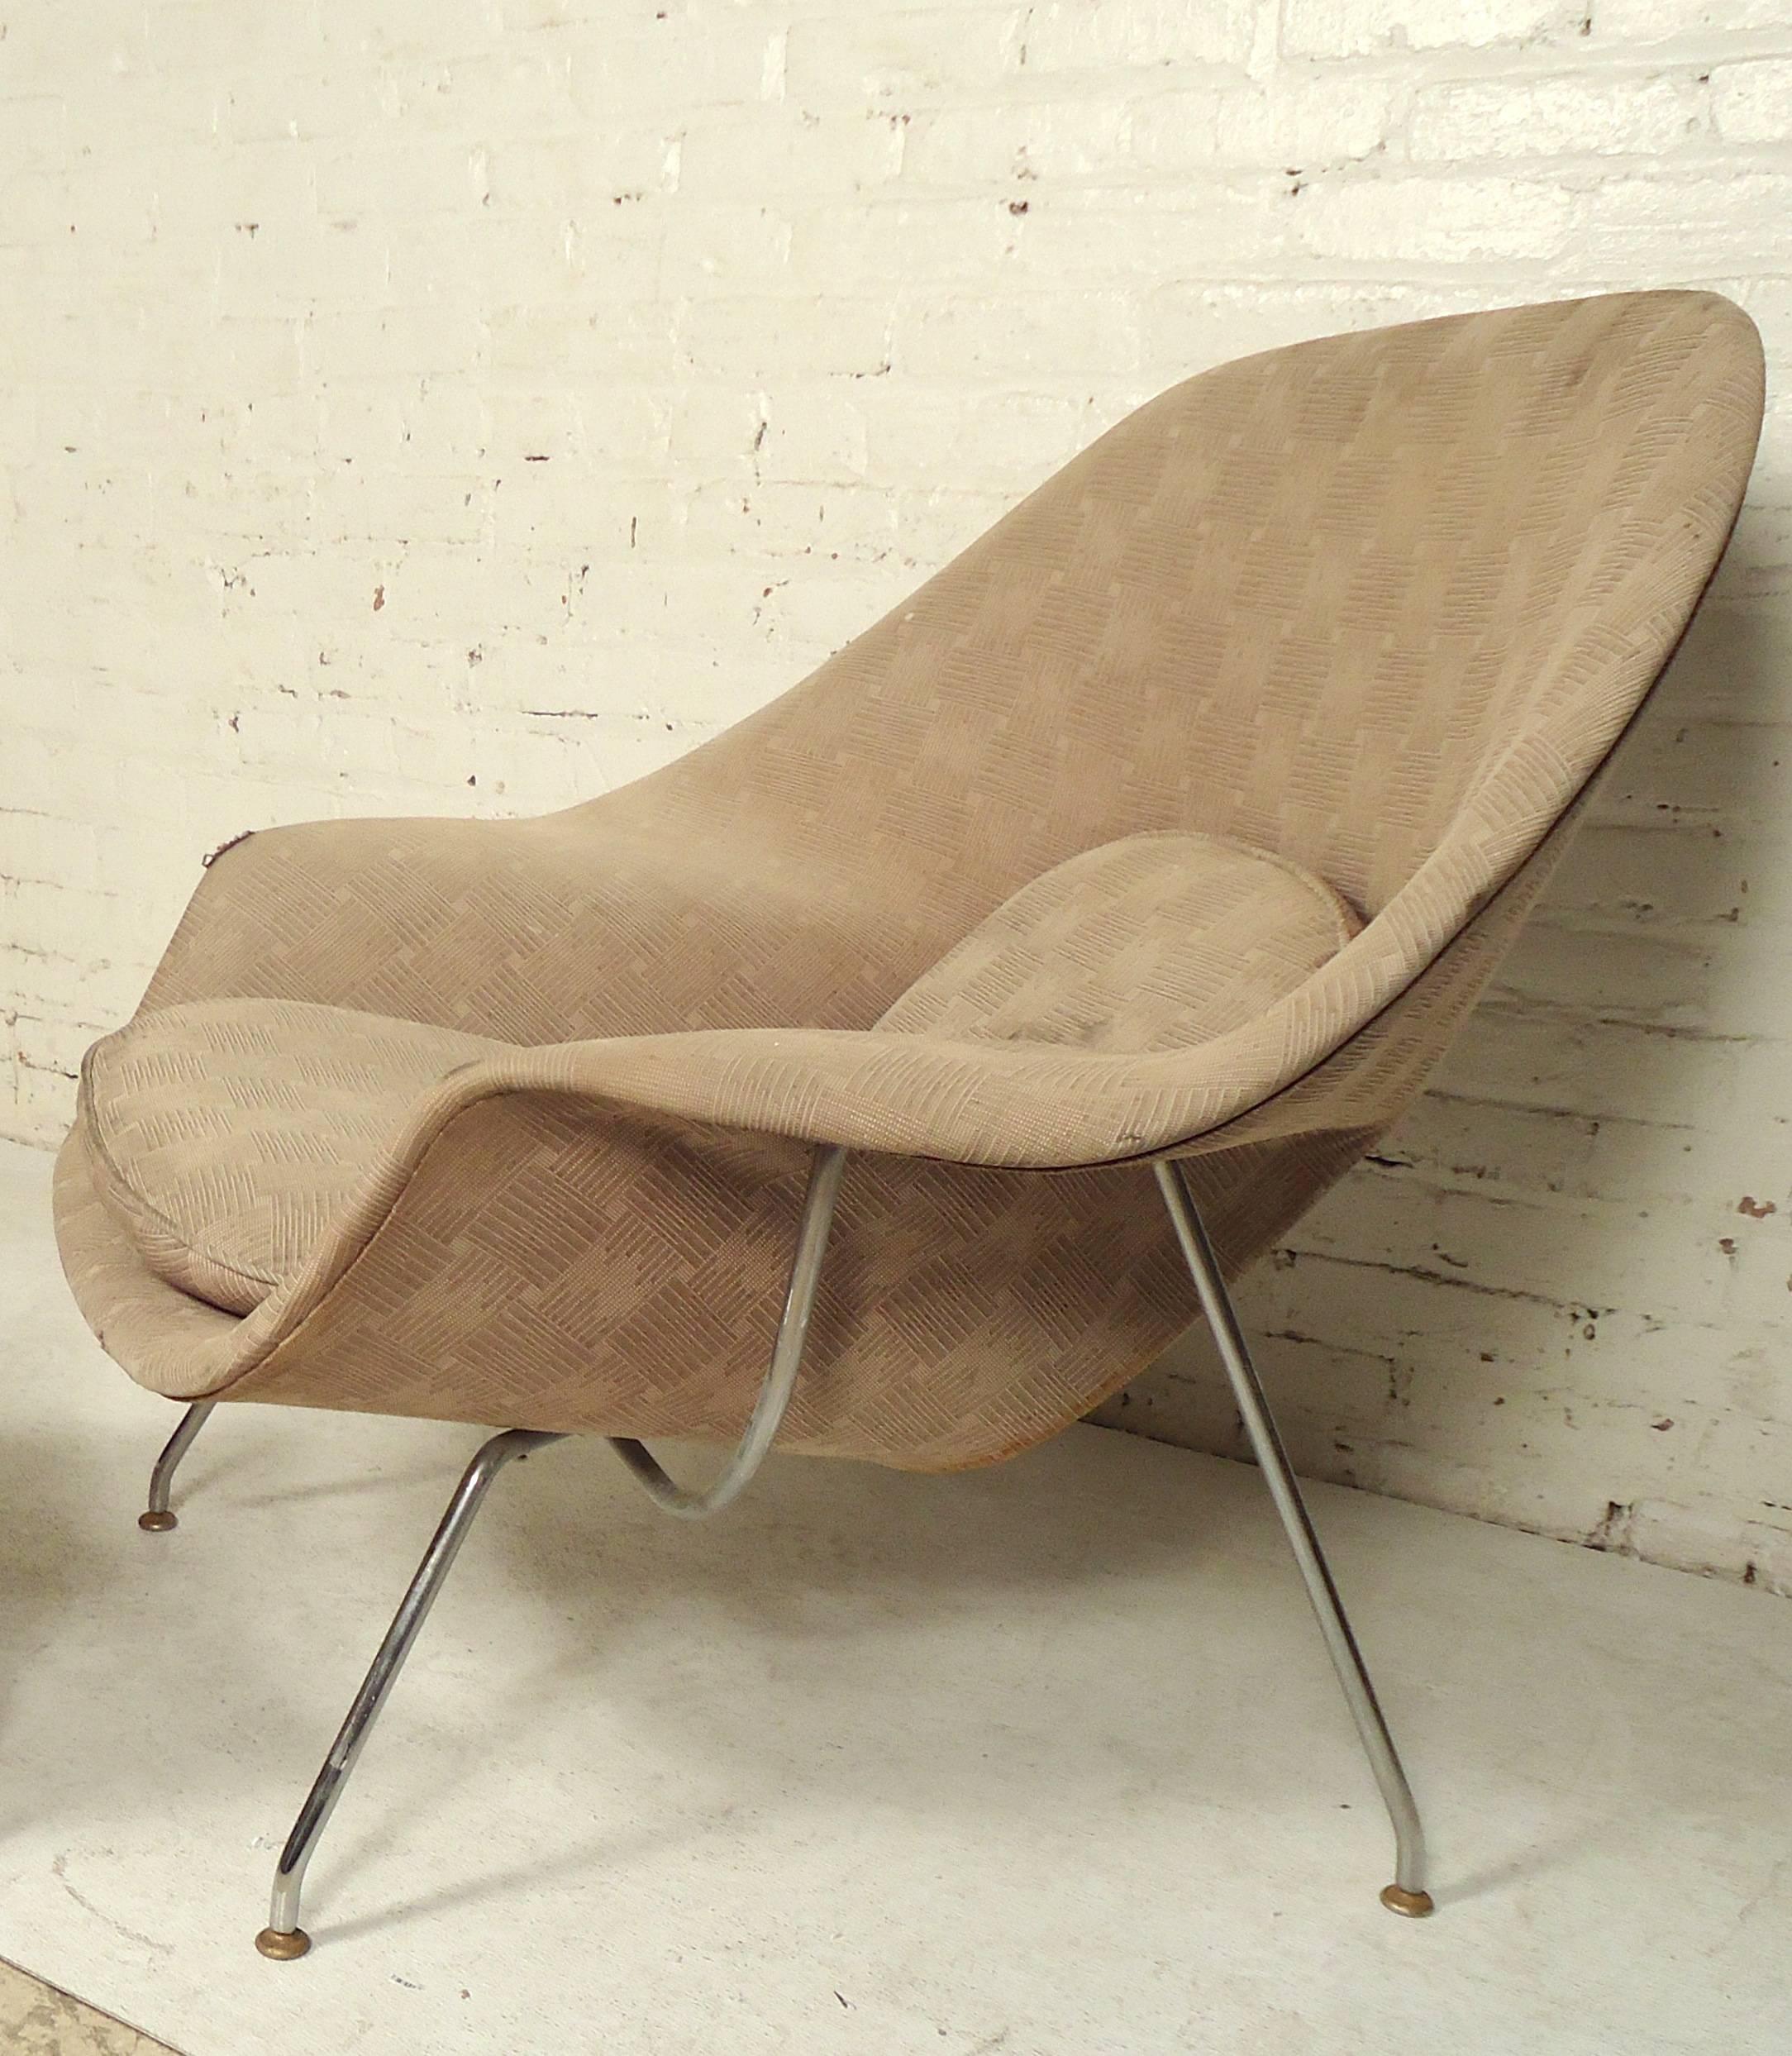 Mid-Century Modern Classic chair designed by Eero Saarinen for Knoll. Includes matching ottoman. Great form and design in need of recovering.

(Please confirm item location - NY or NJ - with dealer).
   